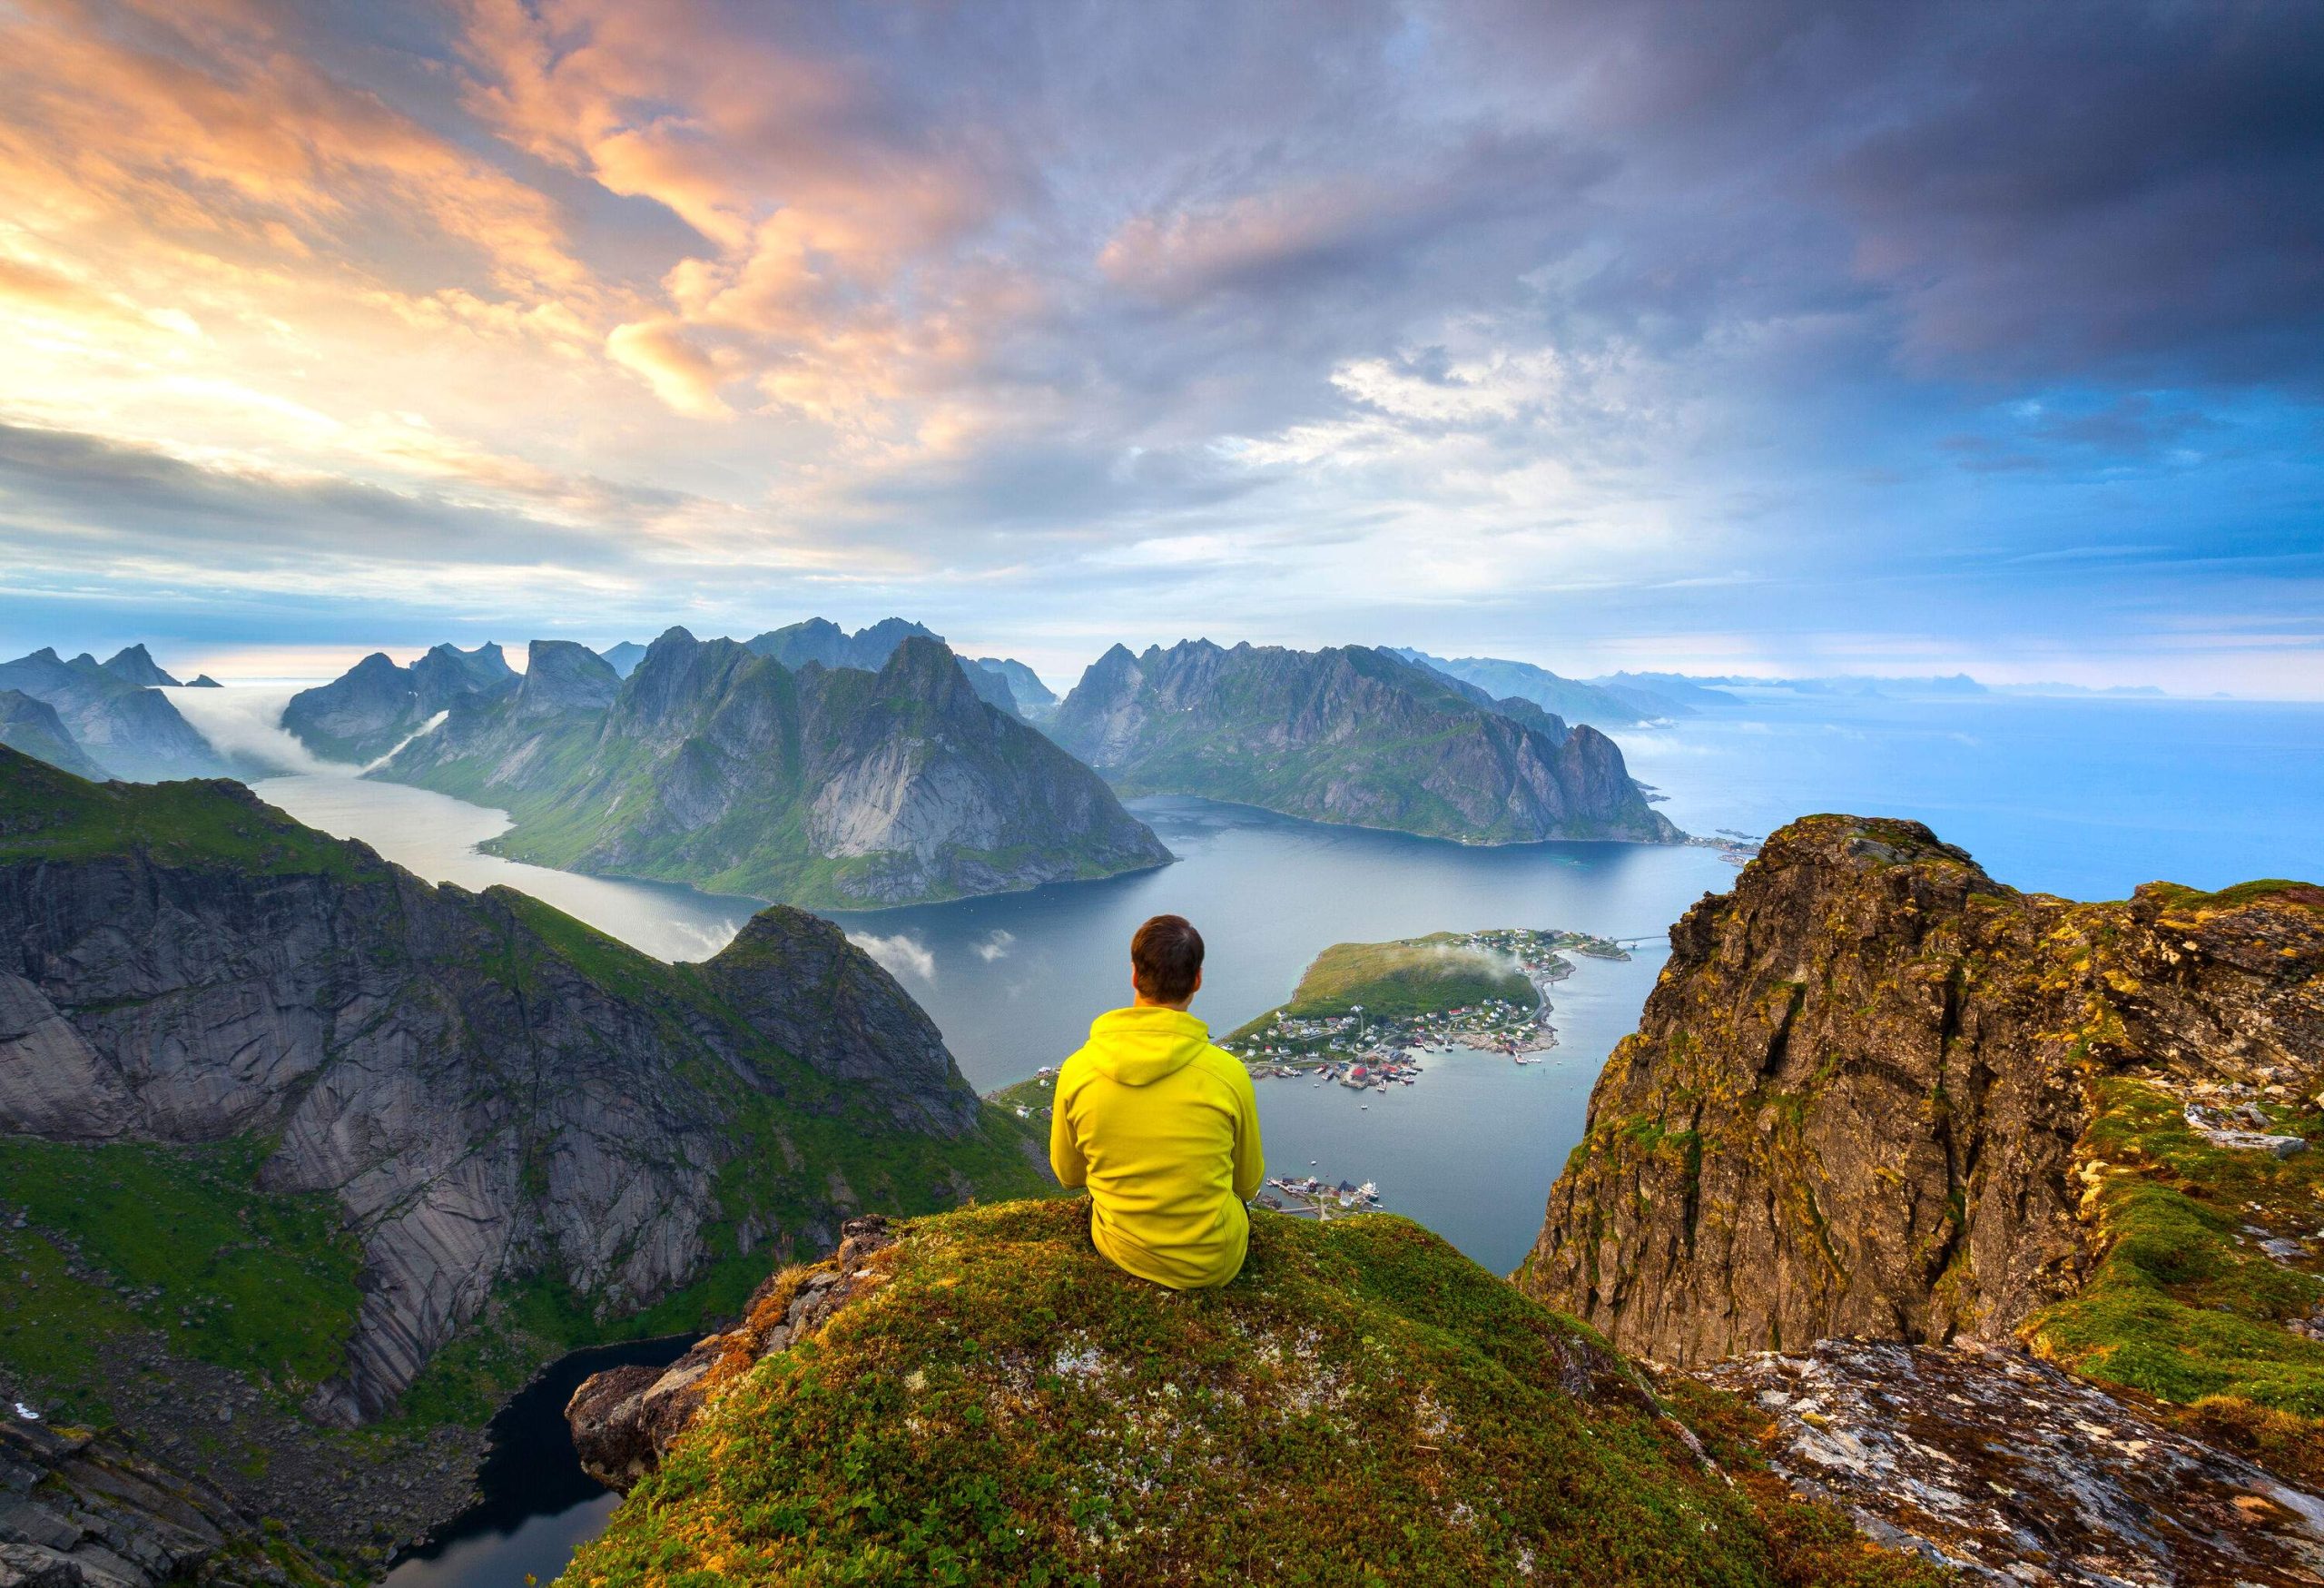 A man sits atop a rocky mountain with a spectacular view of steep rock islands emerging on the sea against the scenic cloudy sky.